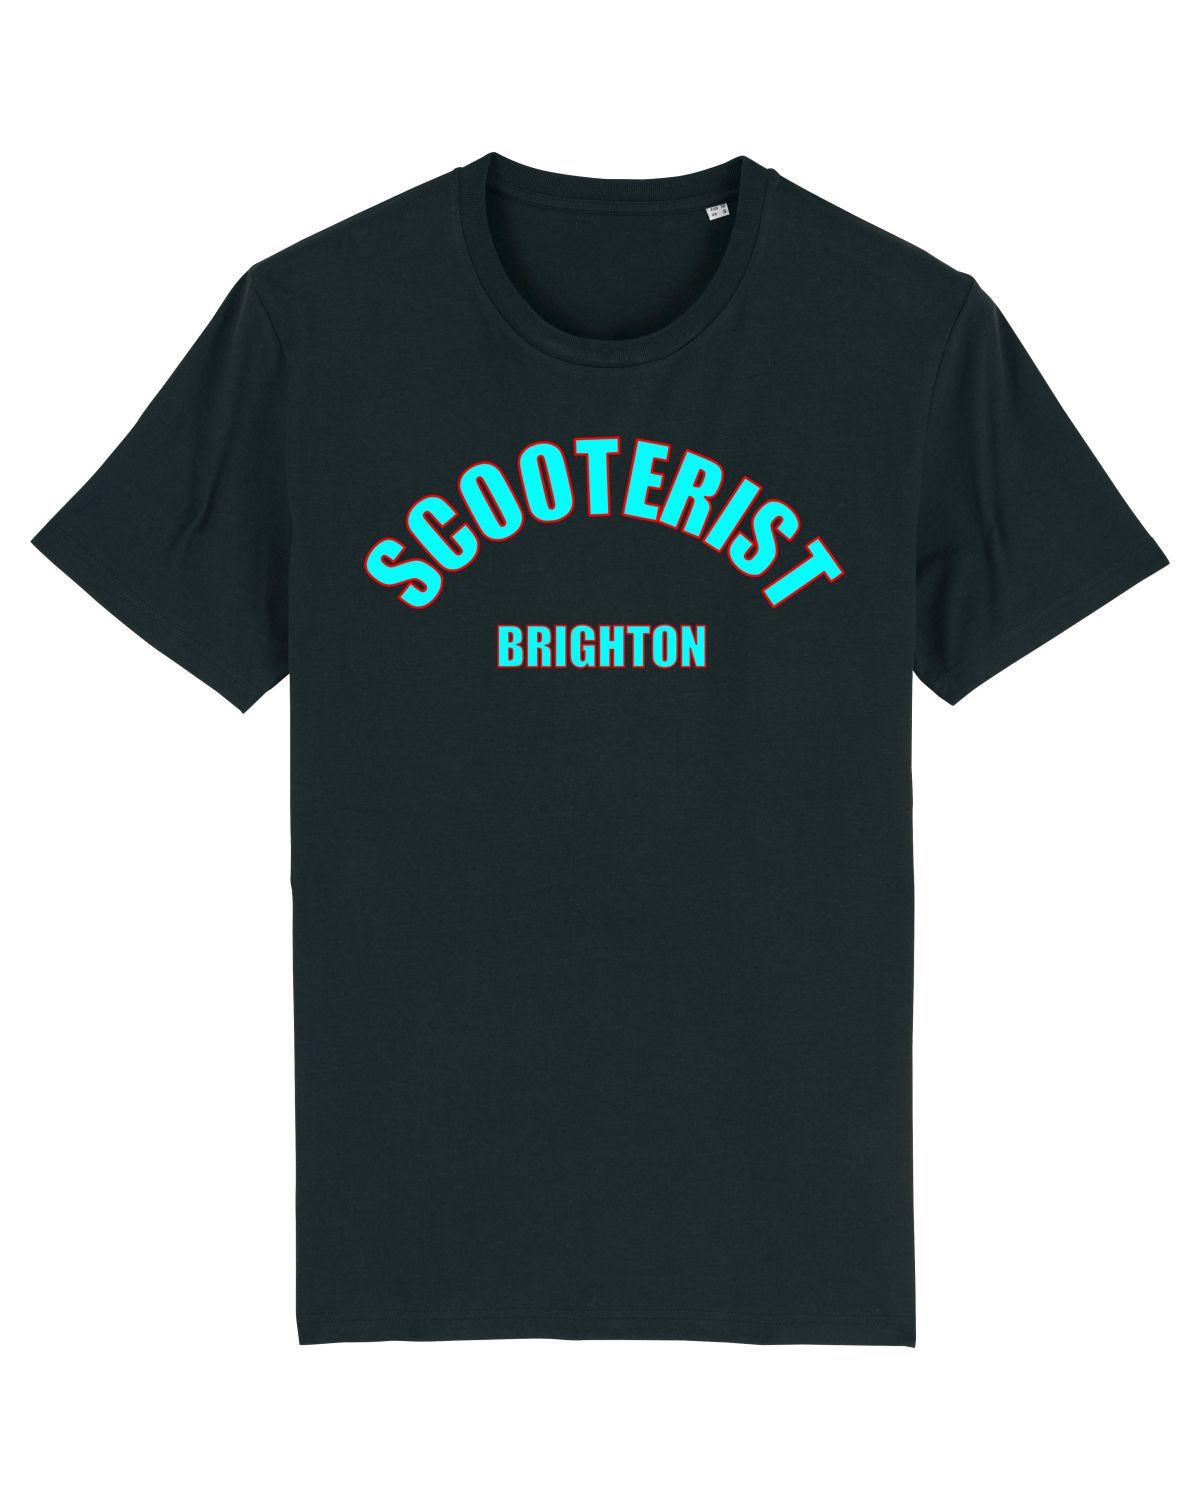 SCOOTERIST: Bespoke T-Shirt Made to Order. Town, Country, Scooter Club, Model (2 Colours) - SOUND IS COLOUR